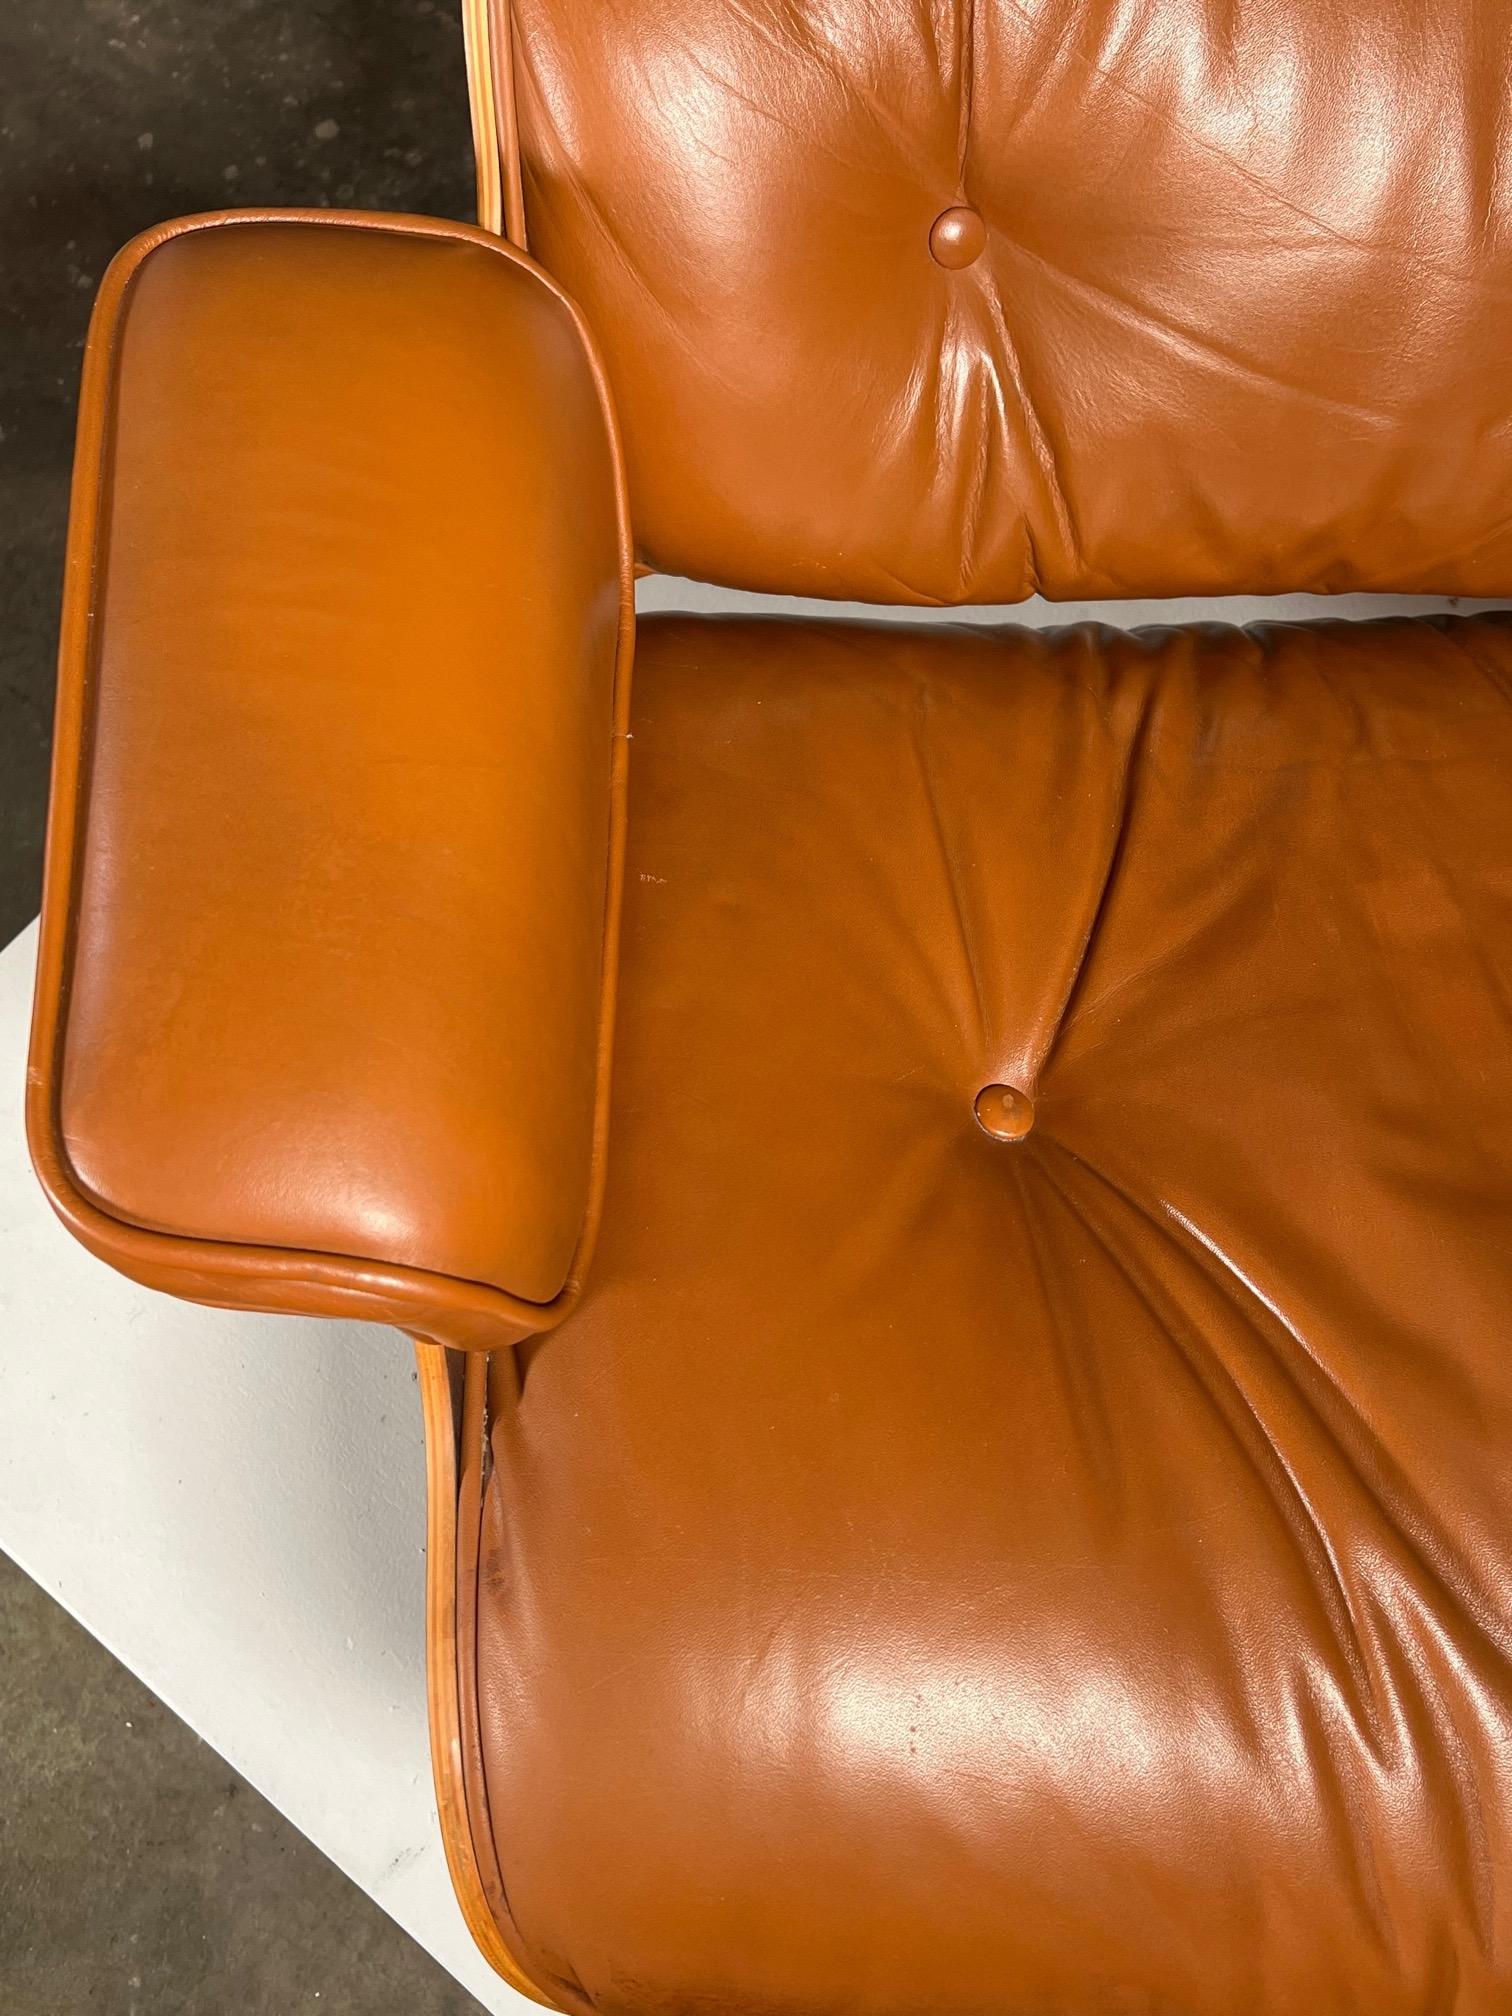 Classic Charles Eames Herman Miller Lounge Chair 1980's Cognac Brown Leather 11